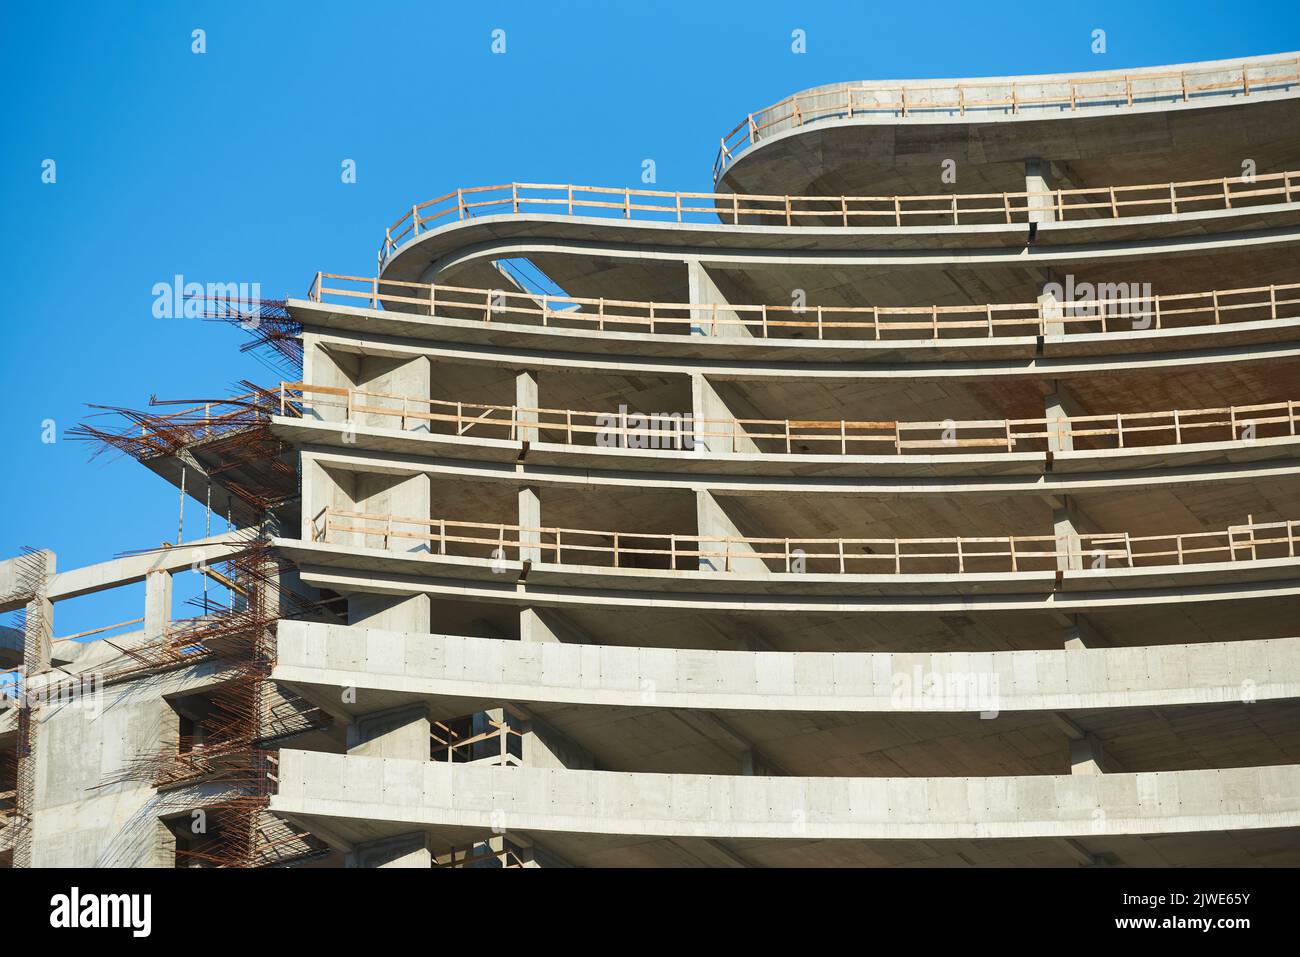 Construction of a reinforced concrete building in Europe Stock Photo